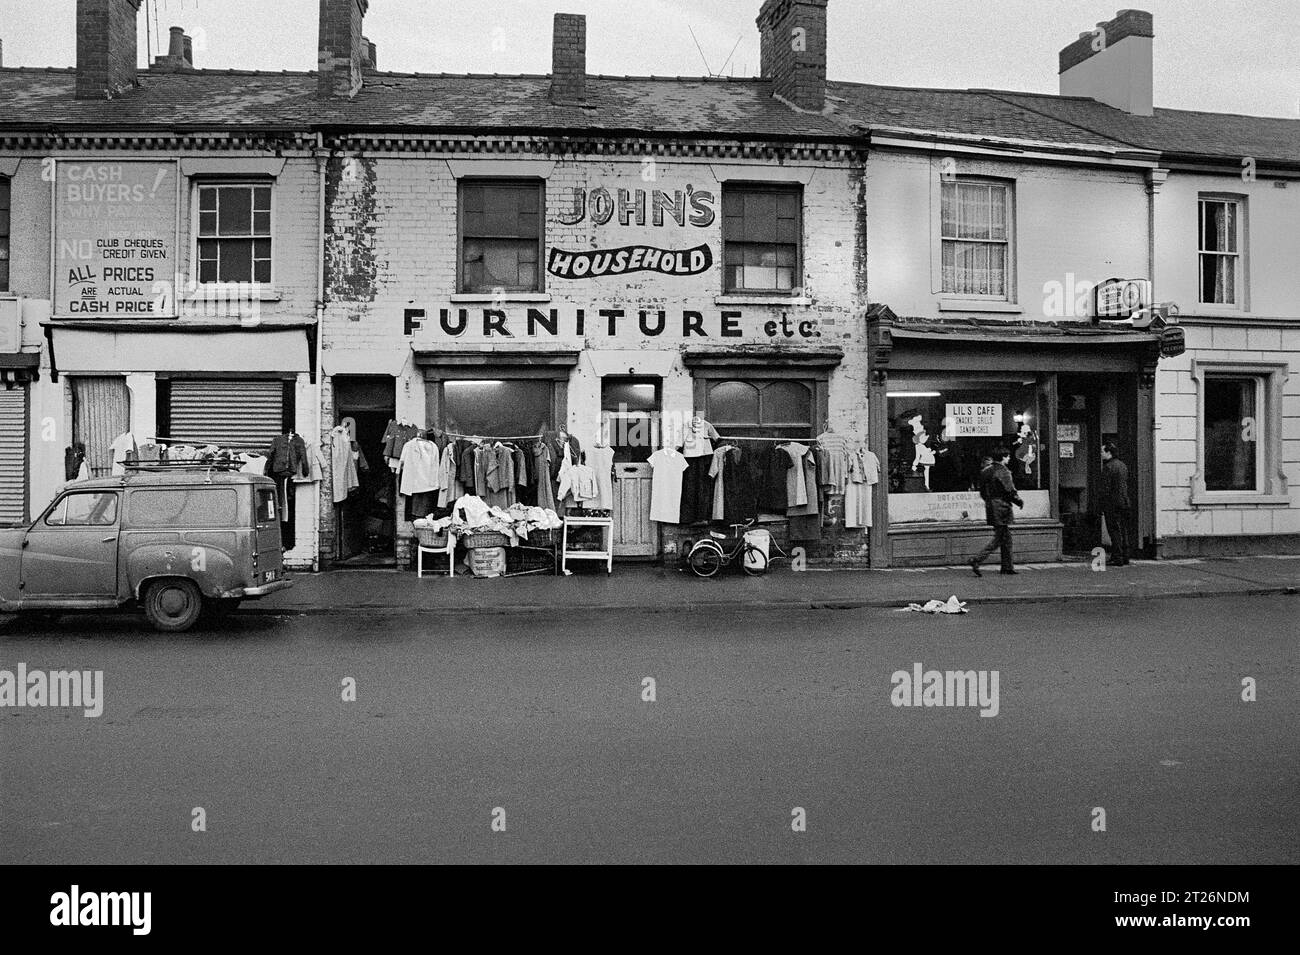 John's Household Furniture shop, Lil's Cafe and the Admiral Dundas Pub prior to demolition in the Slum clearance of St Ann's, Nottingham. 1969-1972 Stock Photo